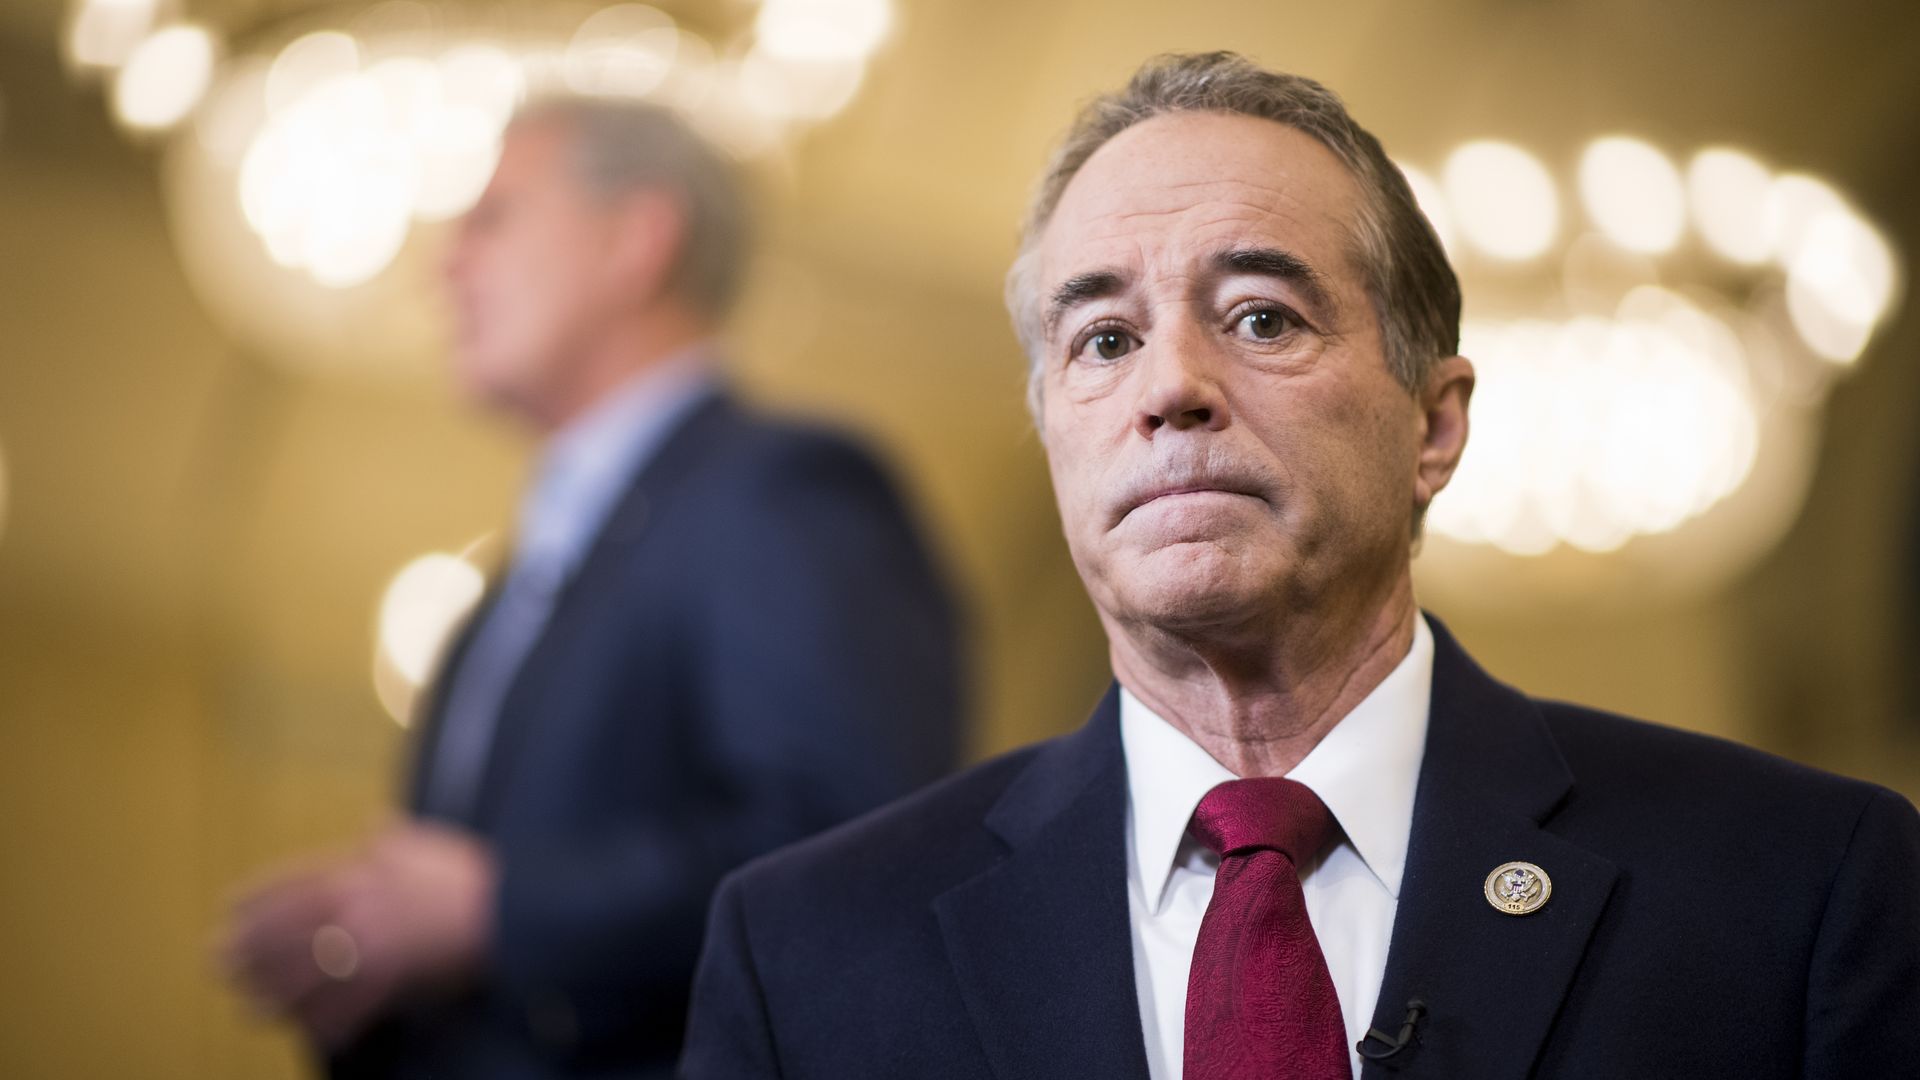 Rep. Chris Collins from New York